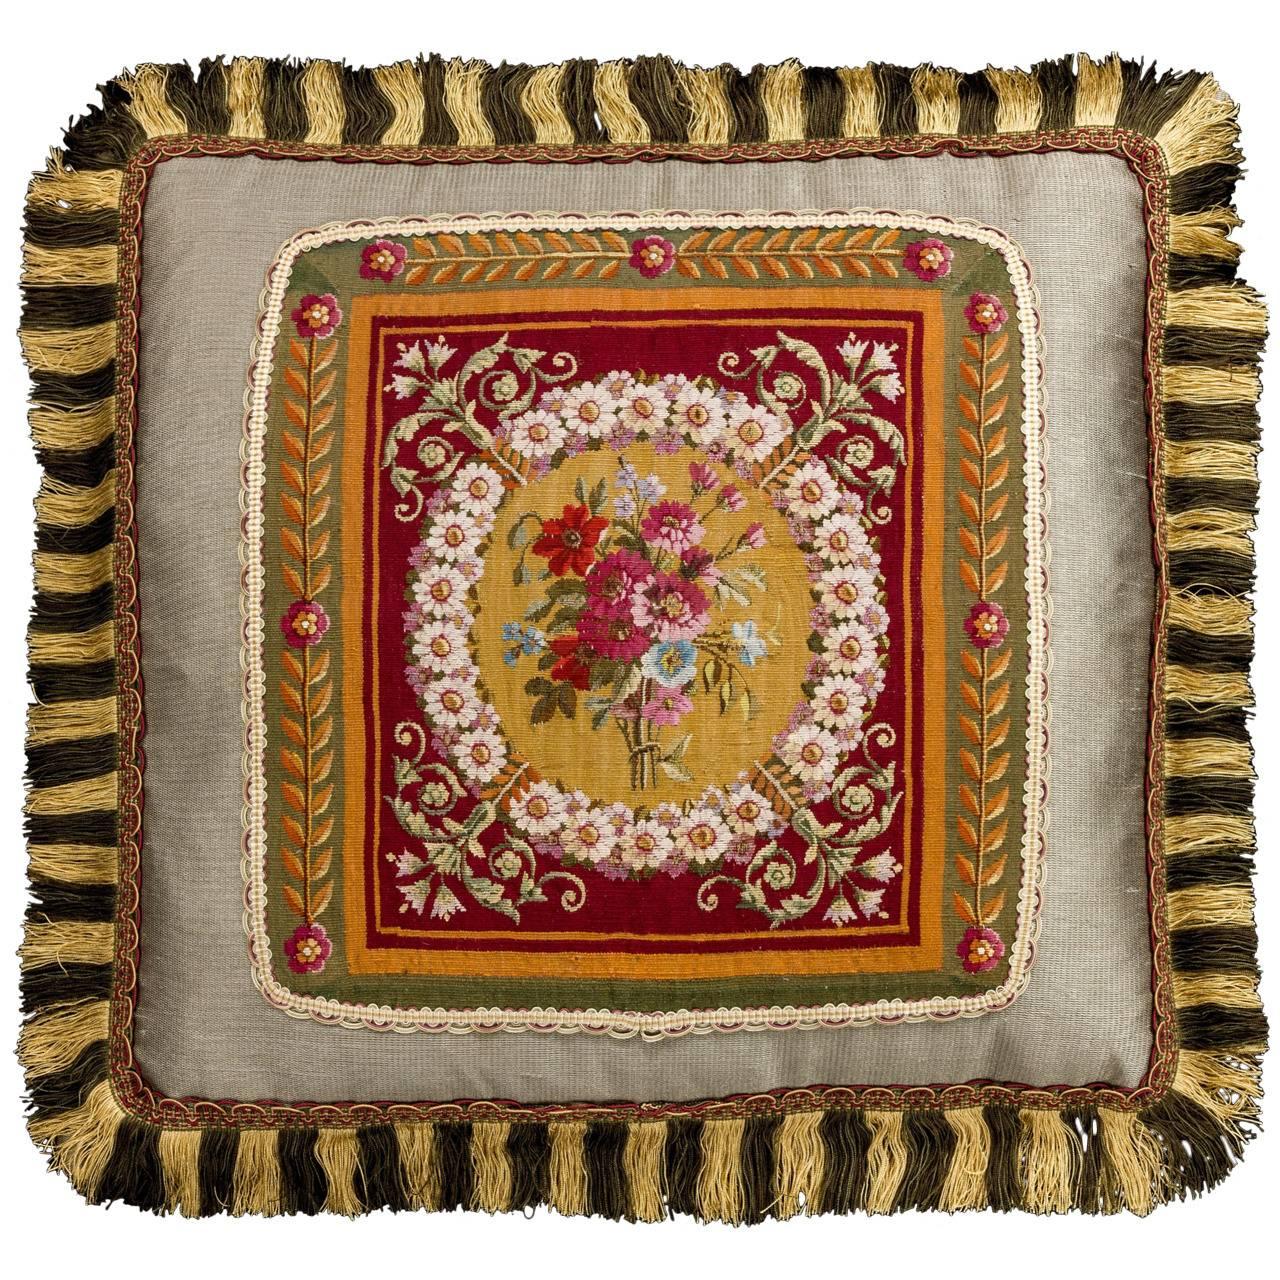 Cushion: 18th Century, Wool And Silk. Flowers on a Gold Background